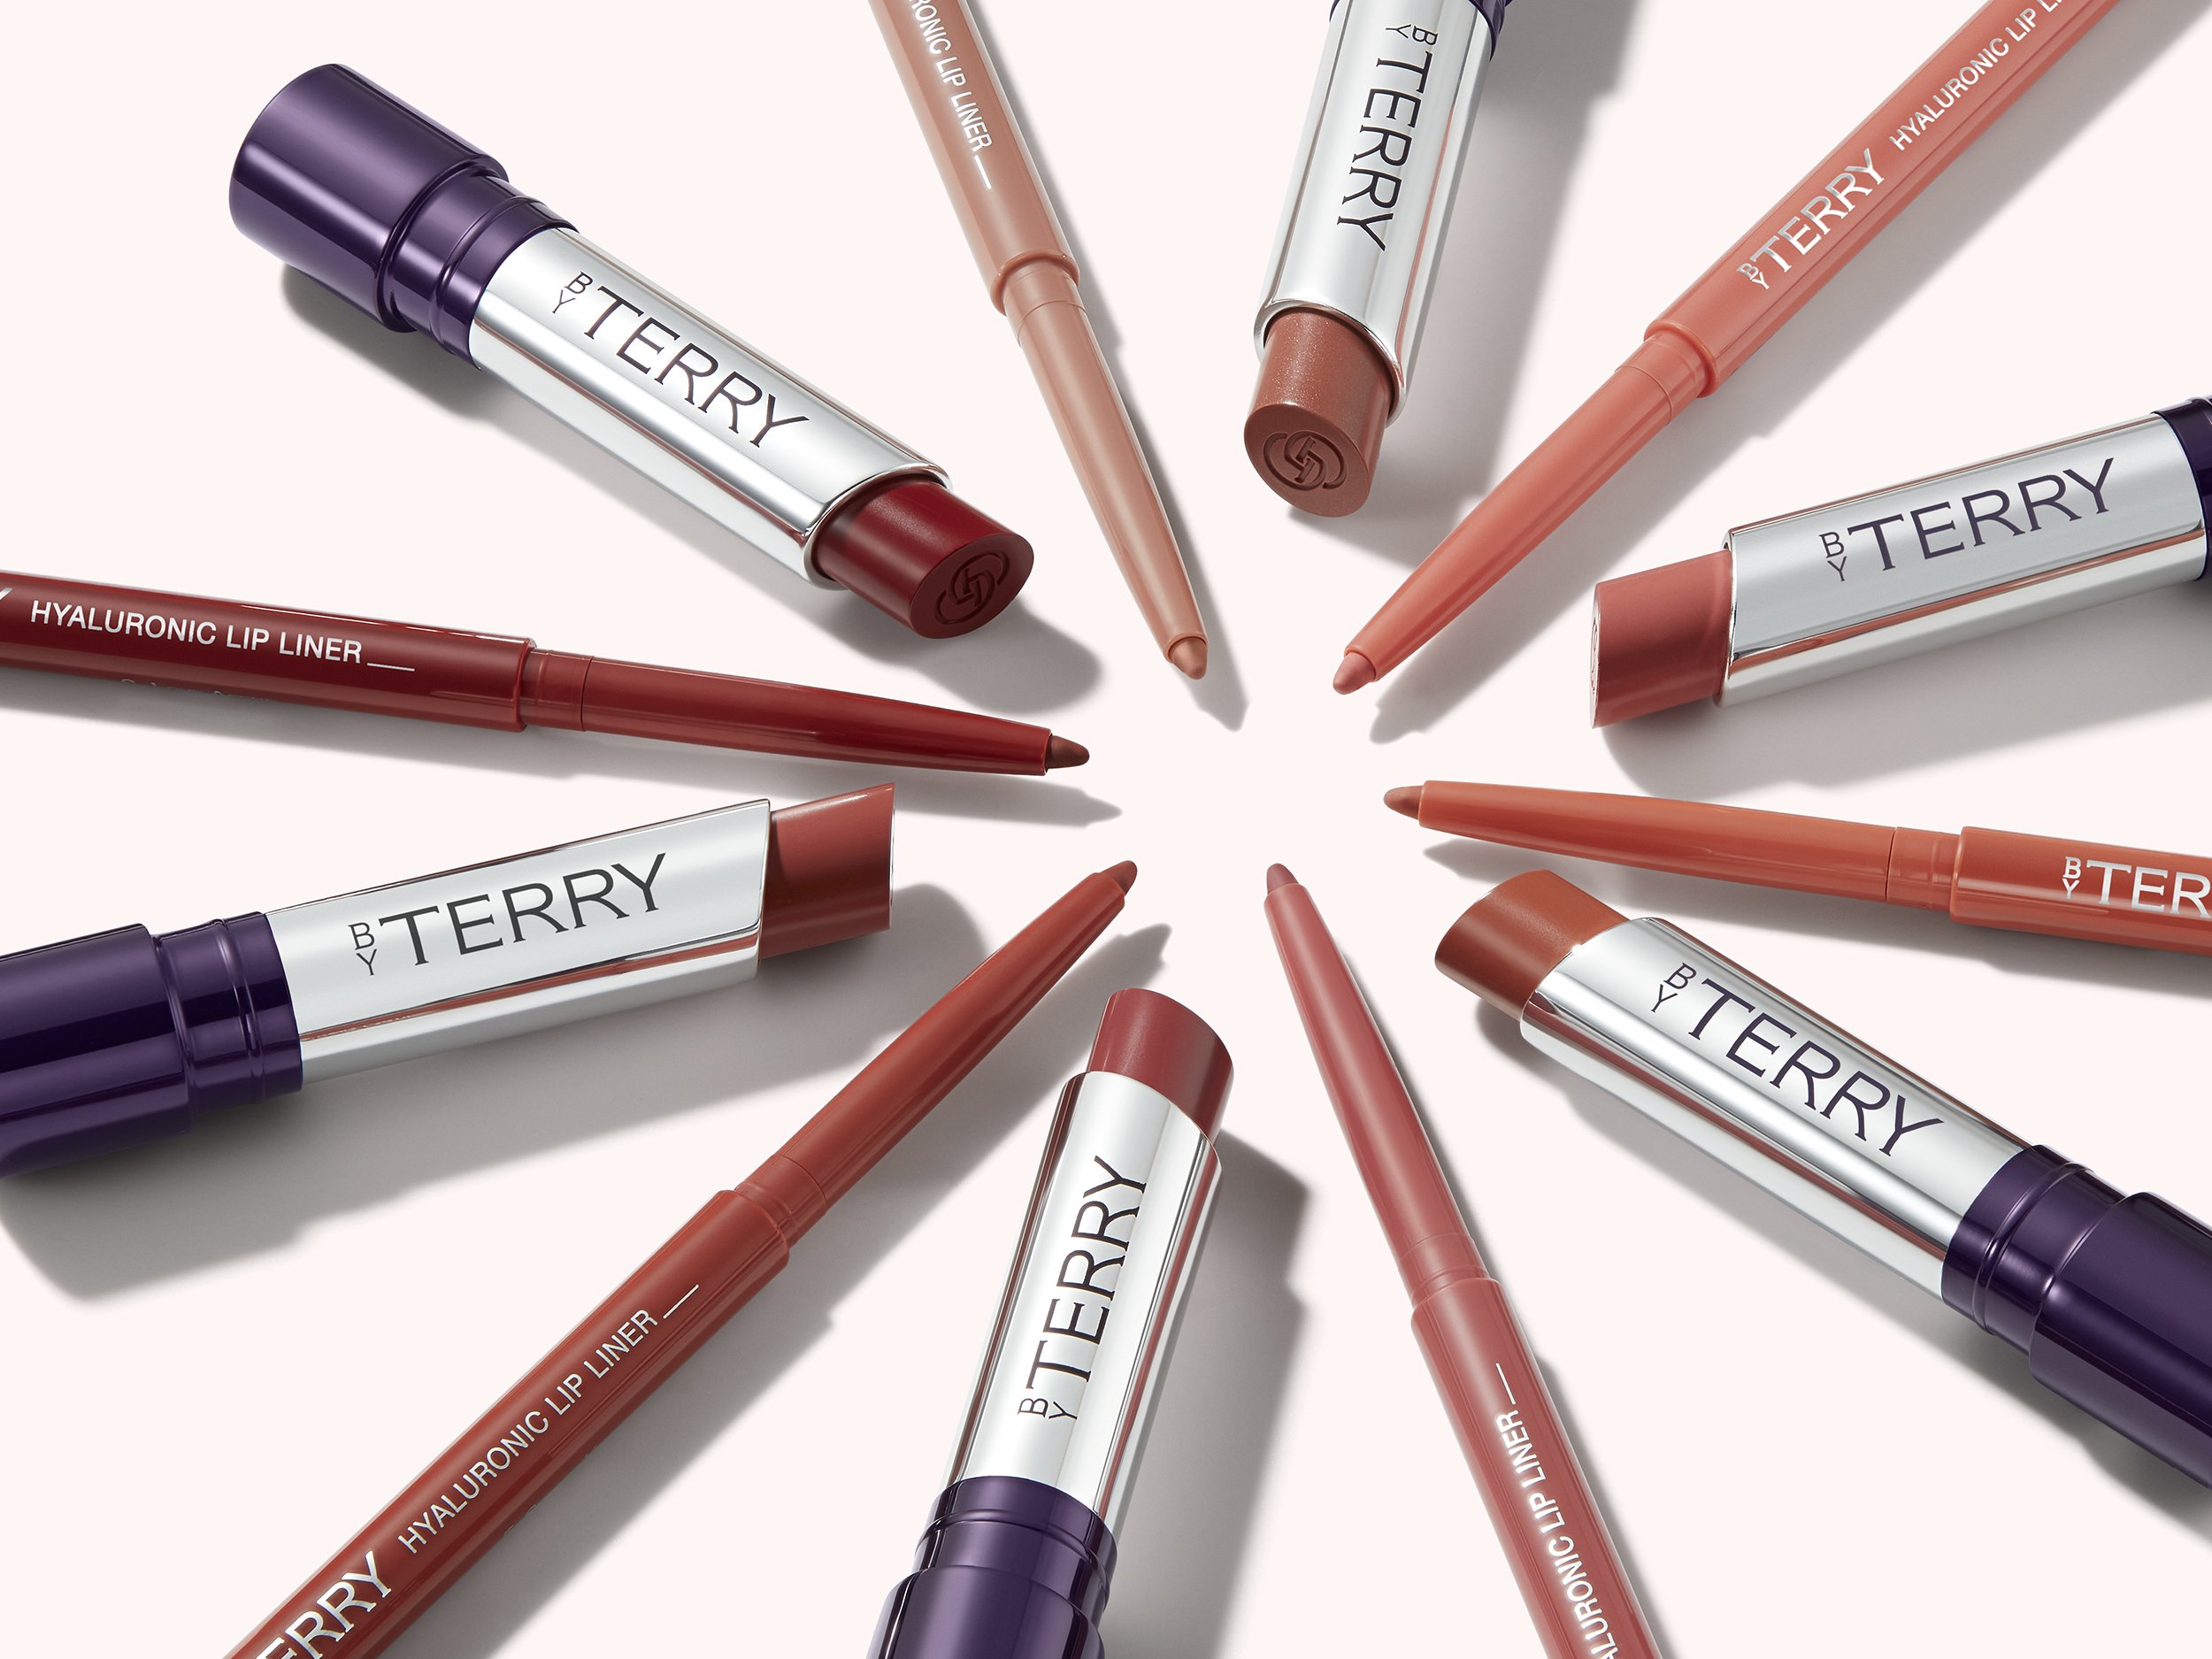 ByTerry Hyaluronic Lip Liner - Cosmetics swatching by Simon Lyle Photography